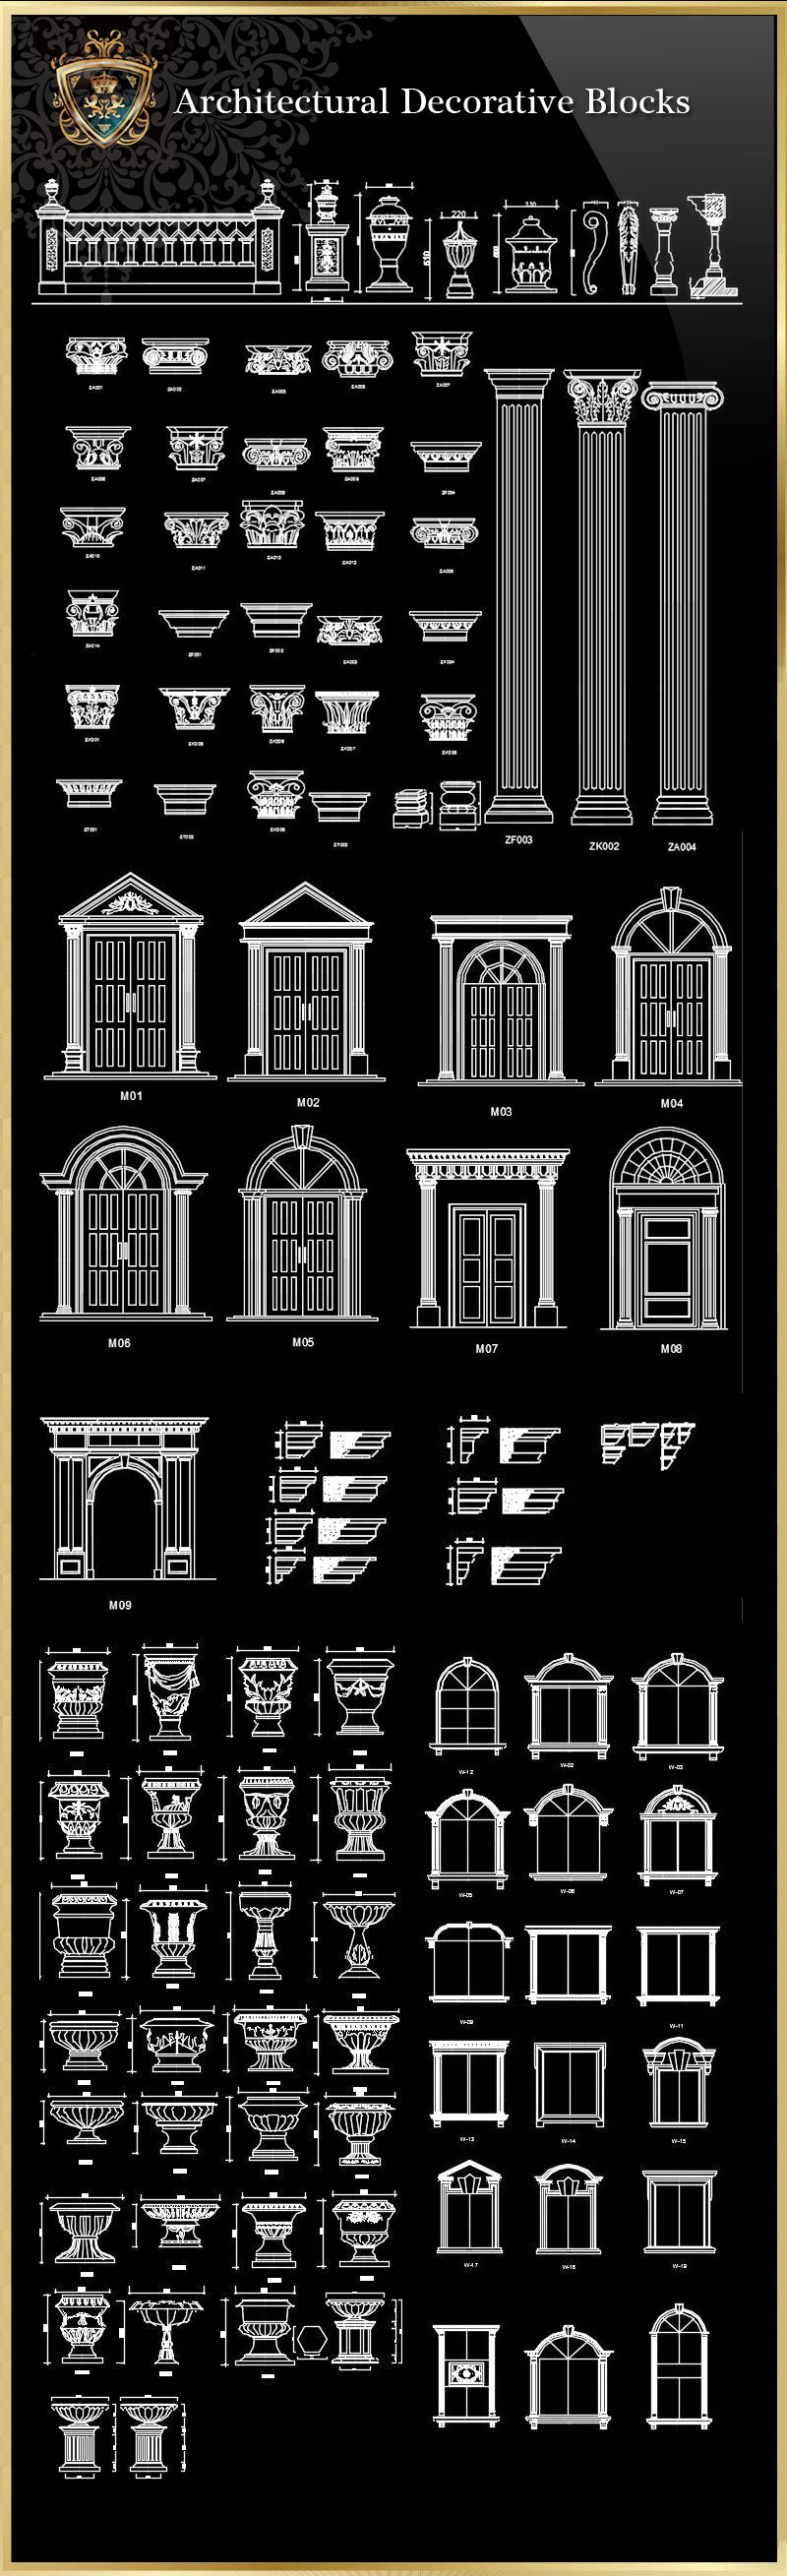 Architectural decorative blocks】★ - CAD Files, DWG files, Plans and Details